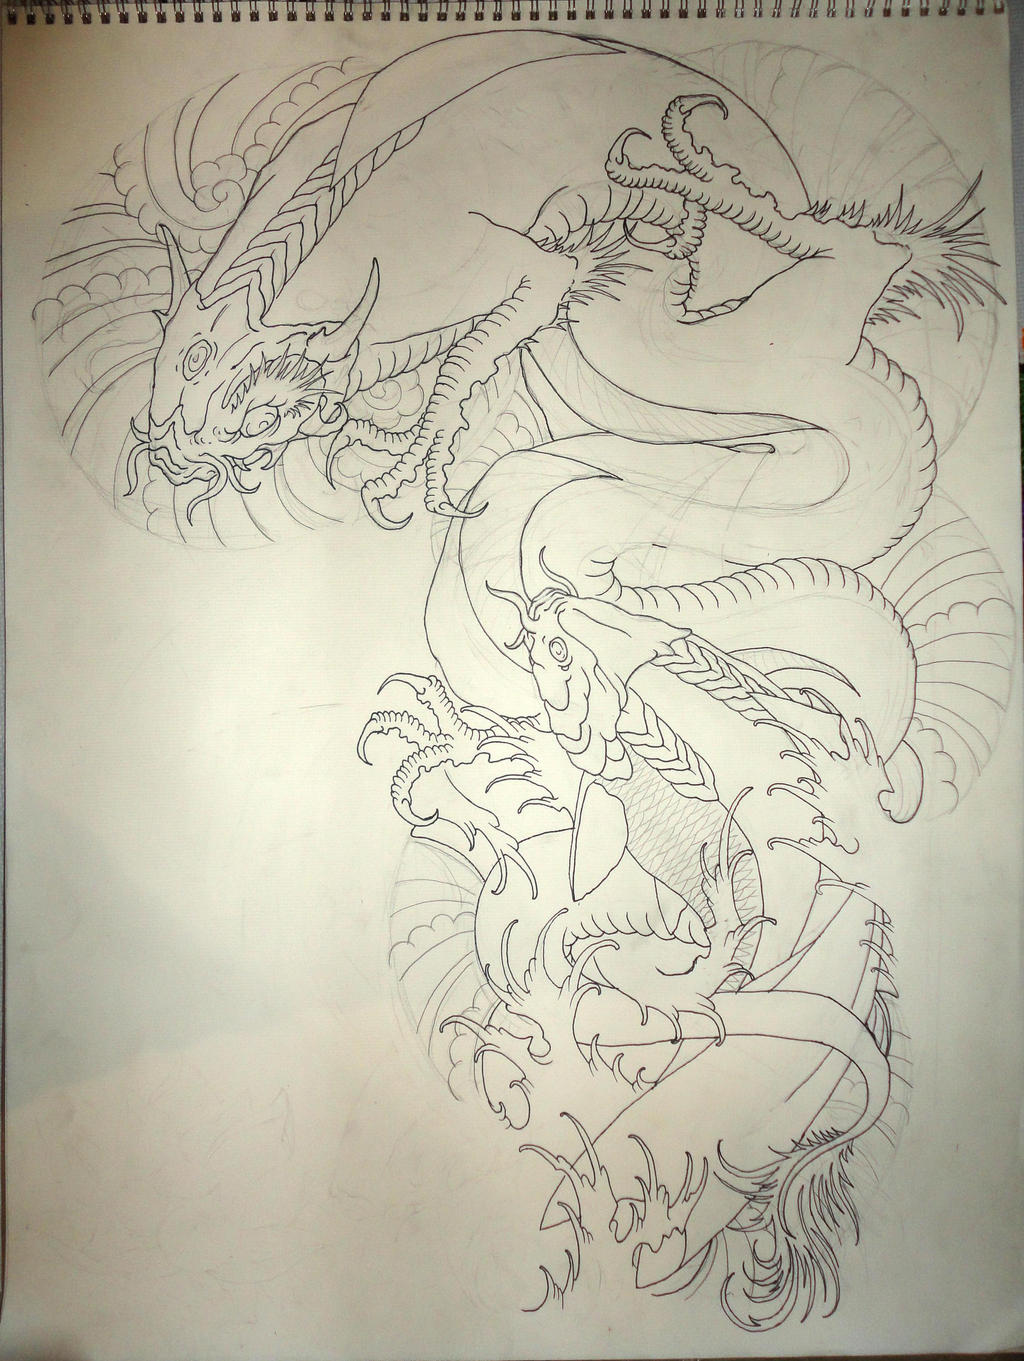 Koi Dragon And Koi Project 1st by ElTri on DeviantArt